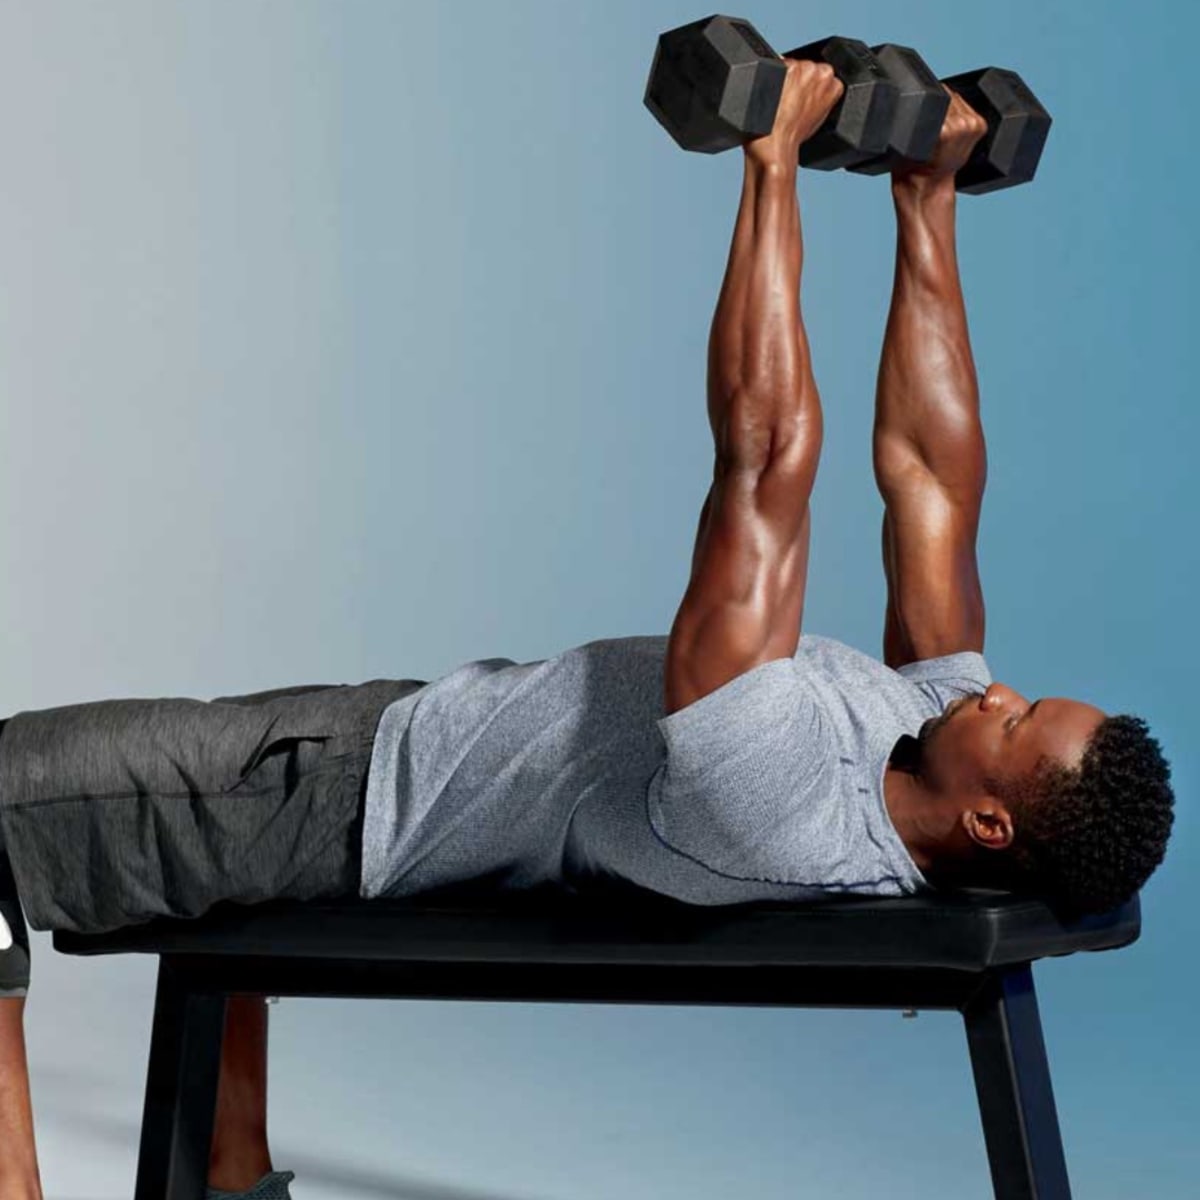 15 Dumbbell Back Exercises to Help You Build Strength and Improve